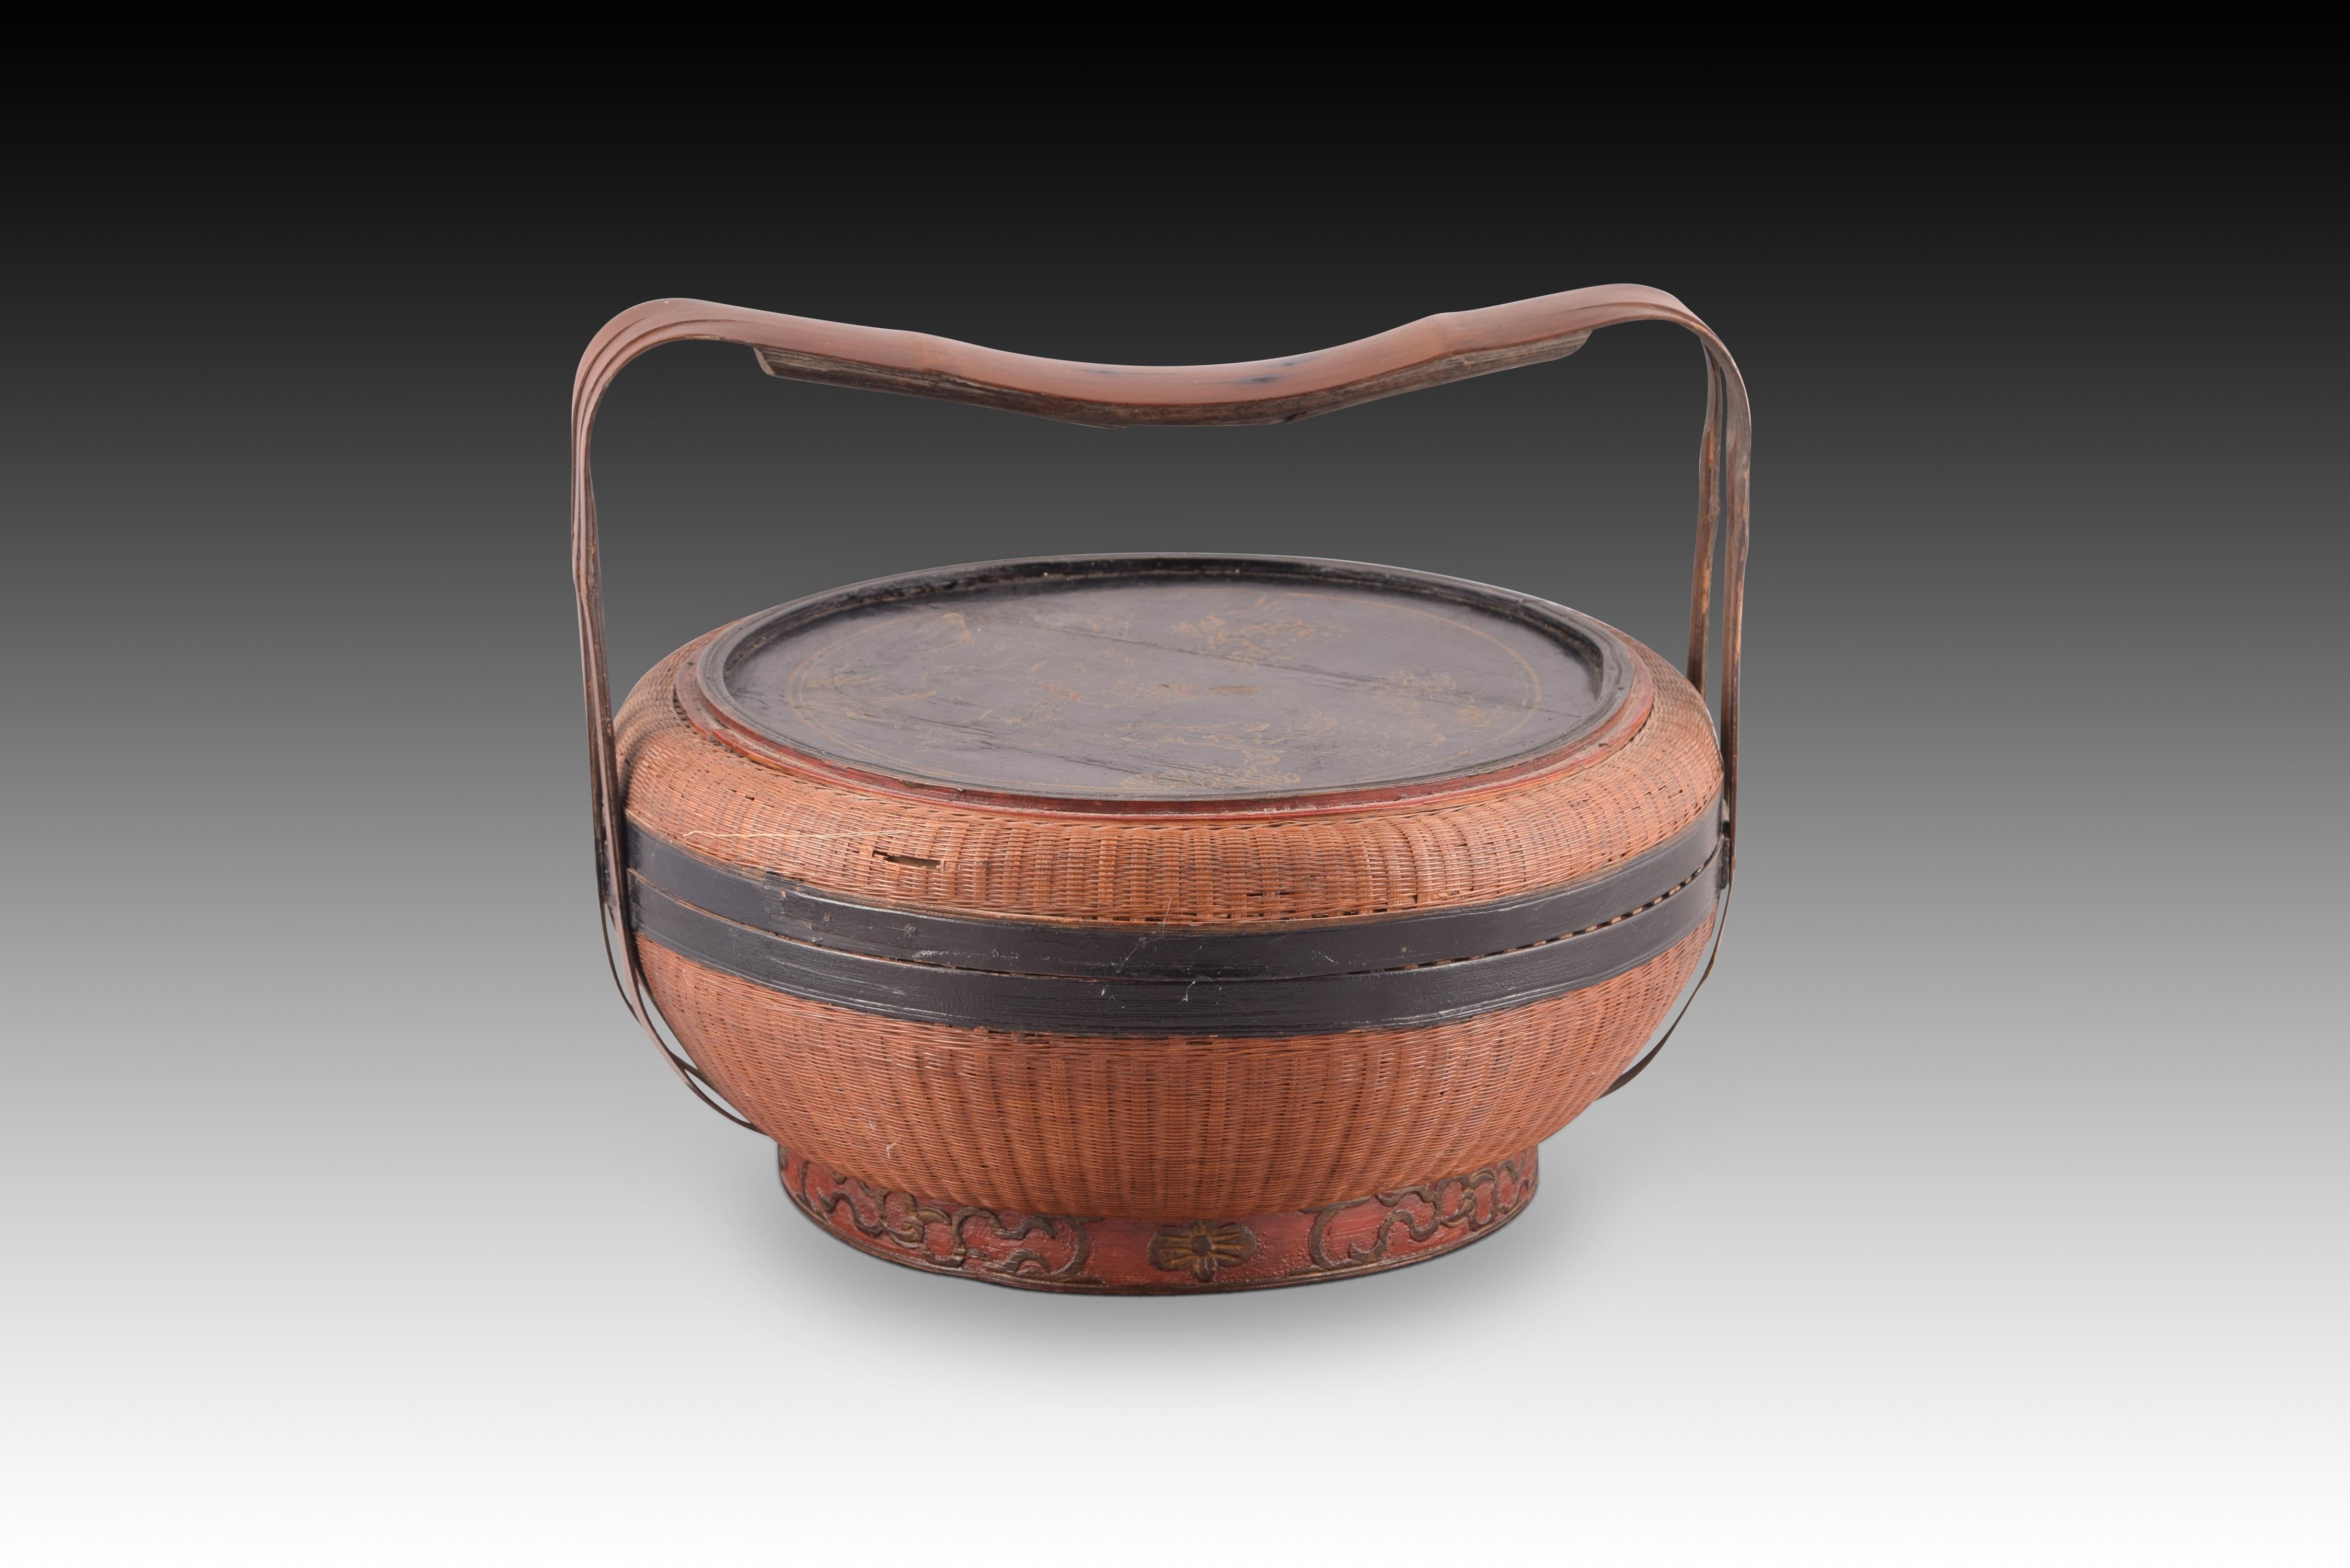 Handmade basket. Vegetable fiber and lacquered wood. China, towards the beginning of the 20th century.
 Chinese basket with a flattened ovoid shape that combines meticulous and complex basketry work on the body with lid, mouthpieces, handles and